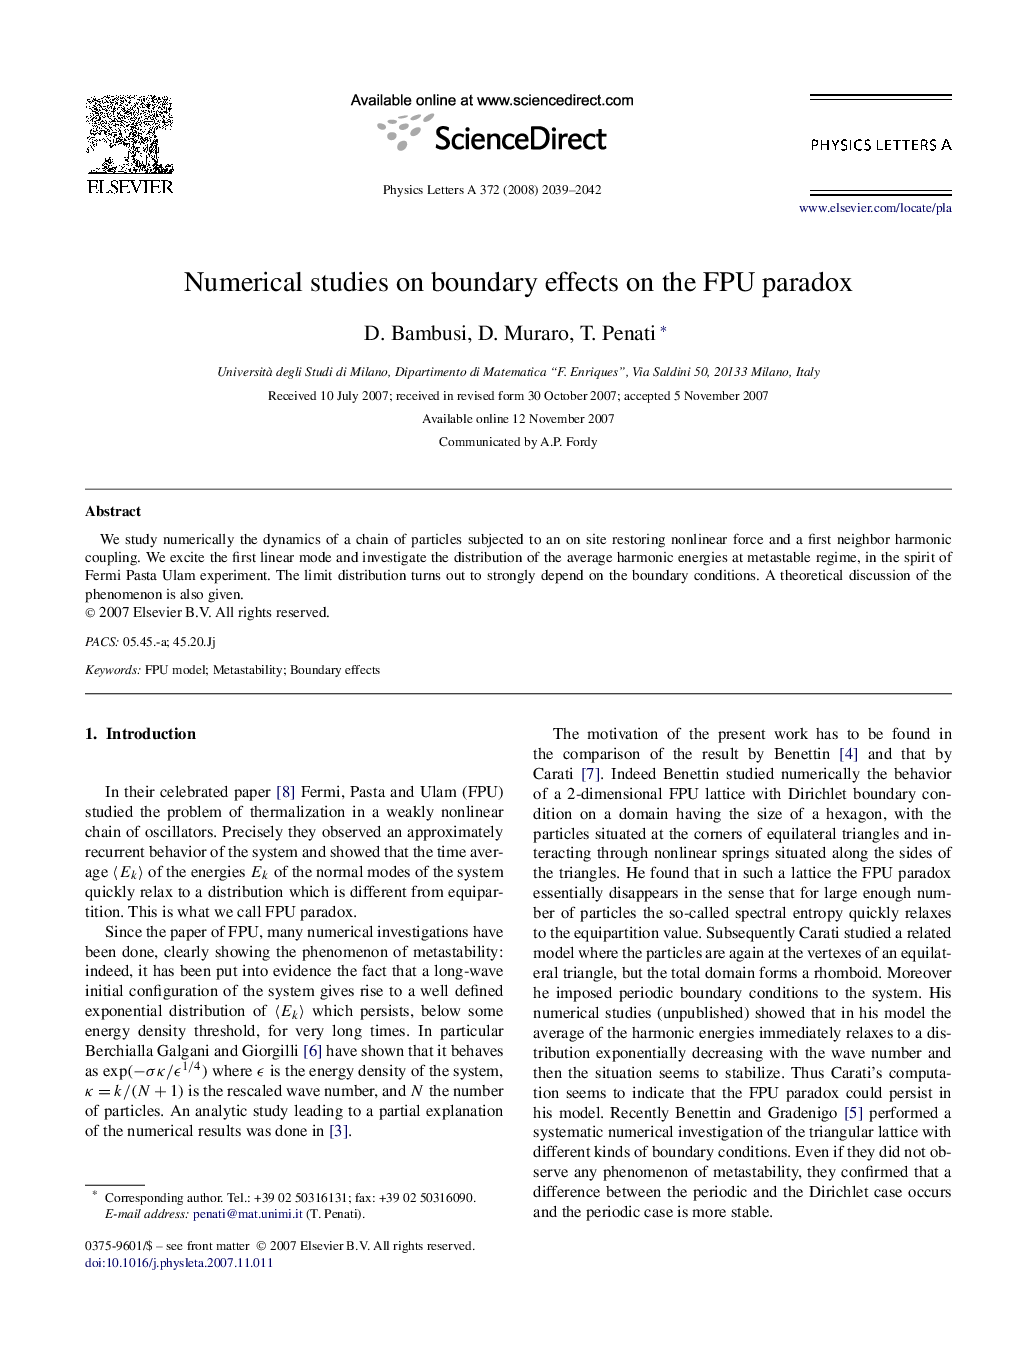 Numerical studies on boundary effects on the FPU paradox